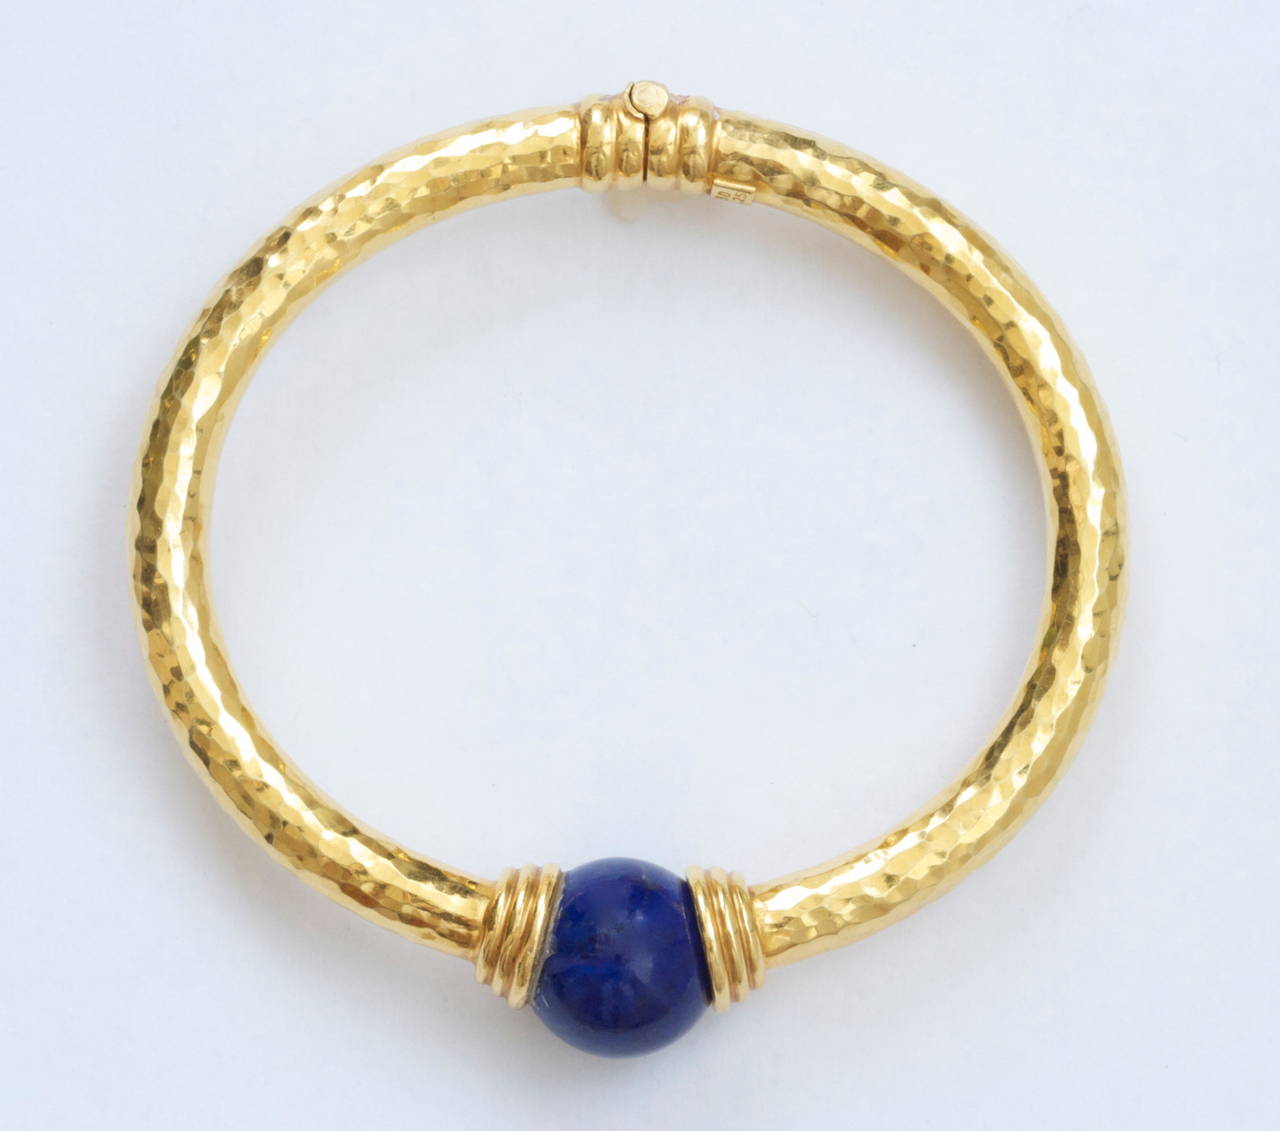 A beautiful hammered gold bracelet with a spherical ball of lapis lazuli acting as a clasp creating a true Greek design from Ilias Lalaounis. The bangle bracelet easily opens on one side of the round lapis making it freely slide onto the wearers